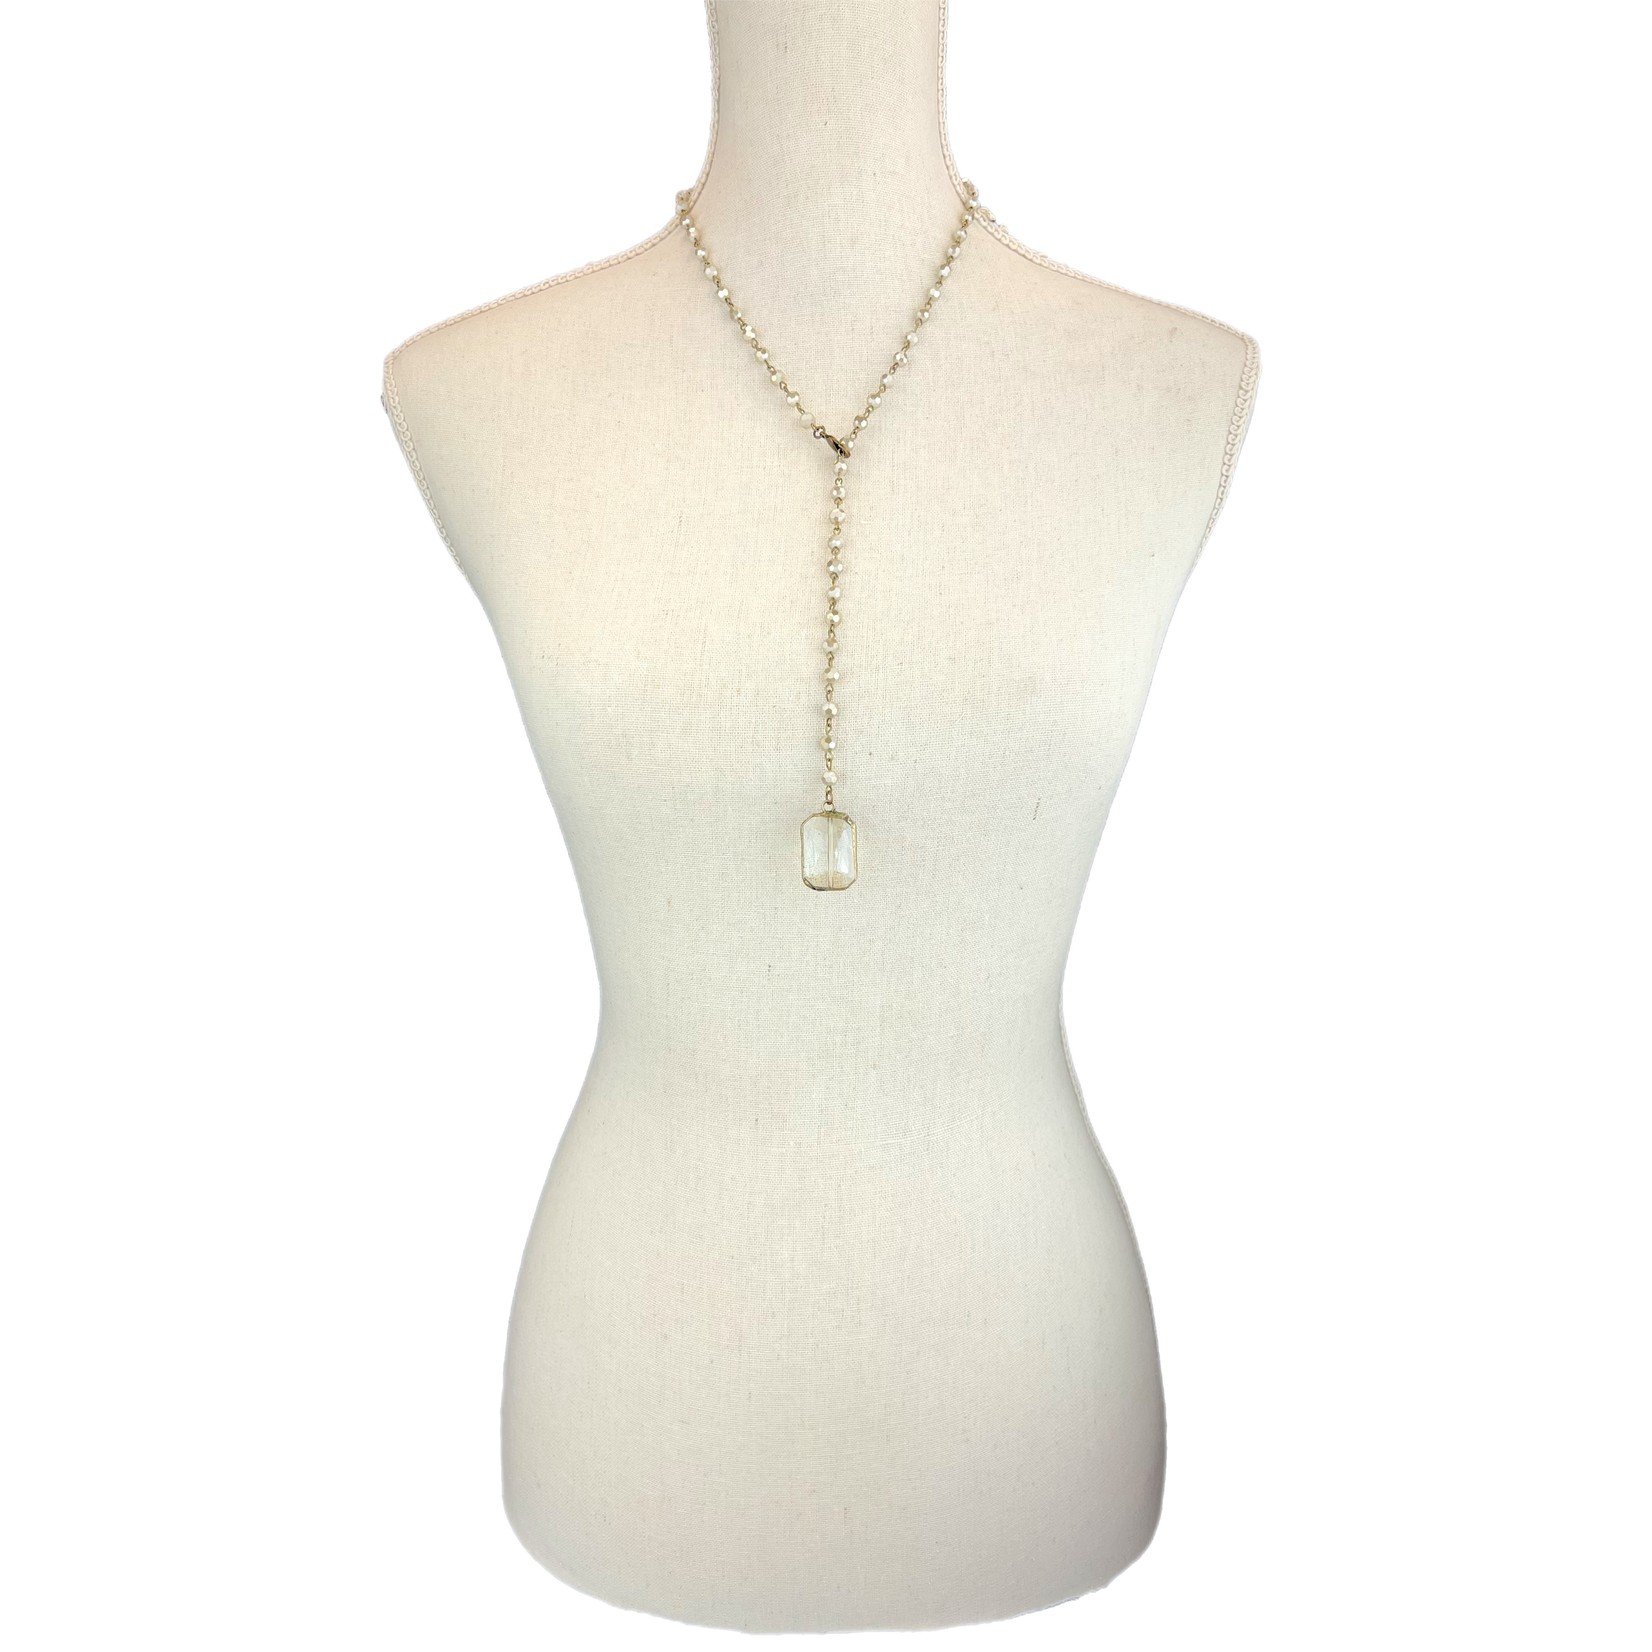 Adjustable Lariat Necklace with Square Pendant